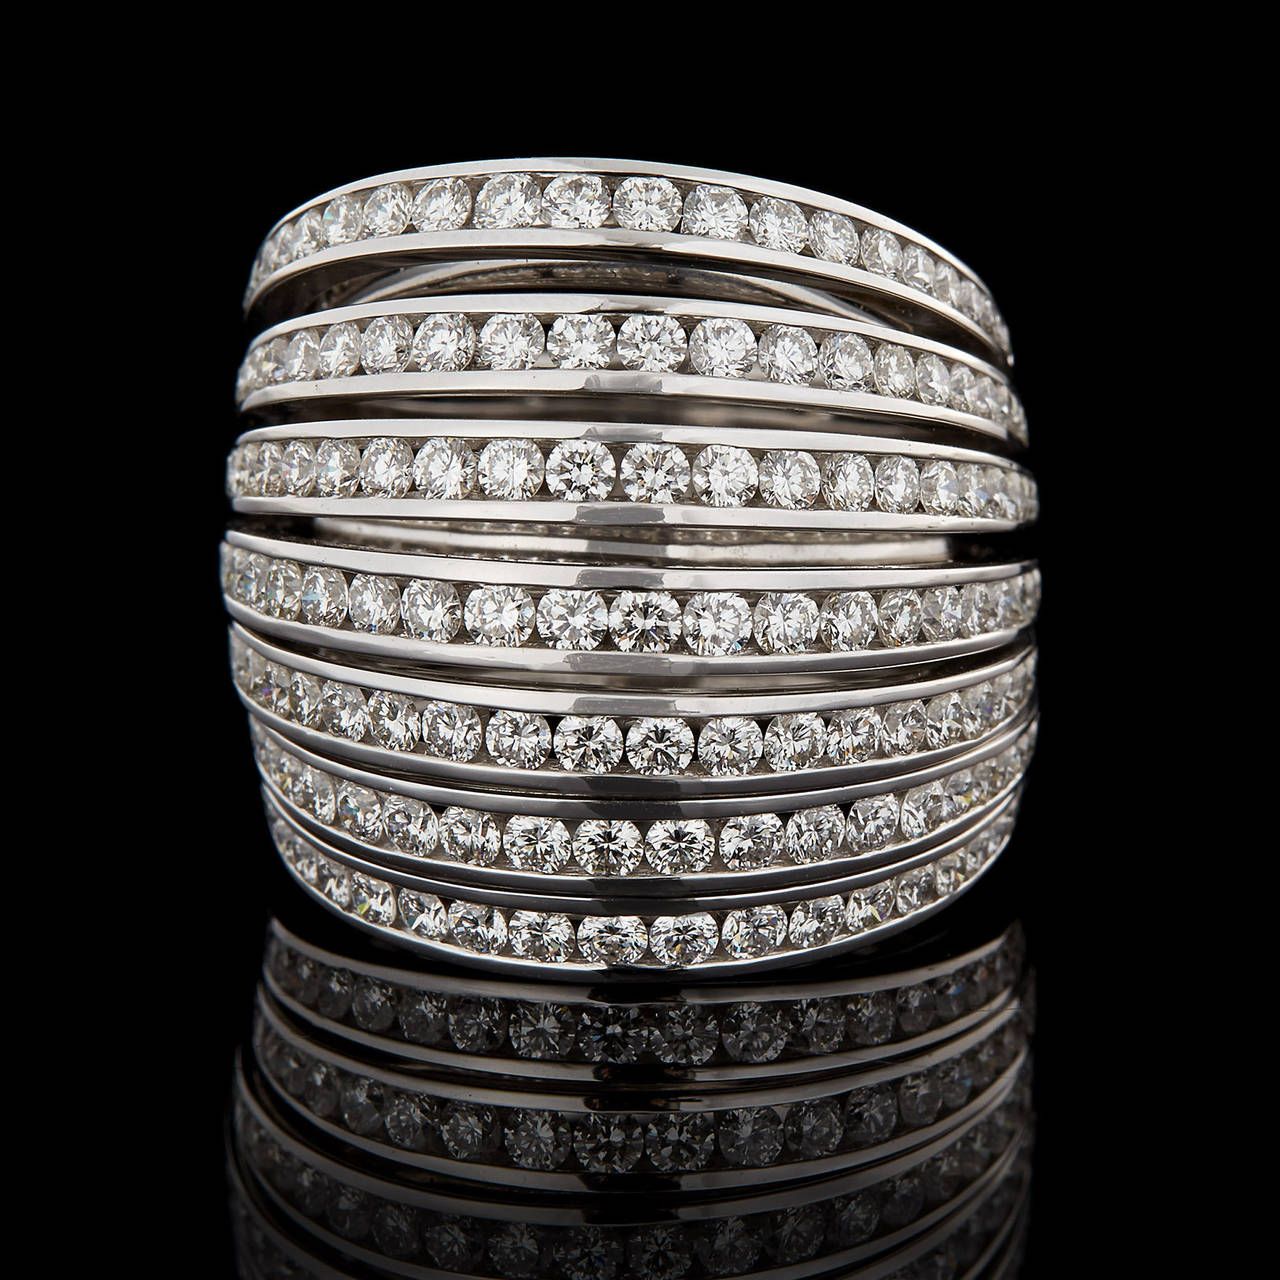 Mattia Cielo Uniquely Constructed 18Kt White Gold Seven Band Mobile Ring Features 2.21 Carats of G Color and VS Clarity Round Brilliant Cut Diamonds. The large statement ring moves with the wearer, displaying beautiful Italian craftsmanship and